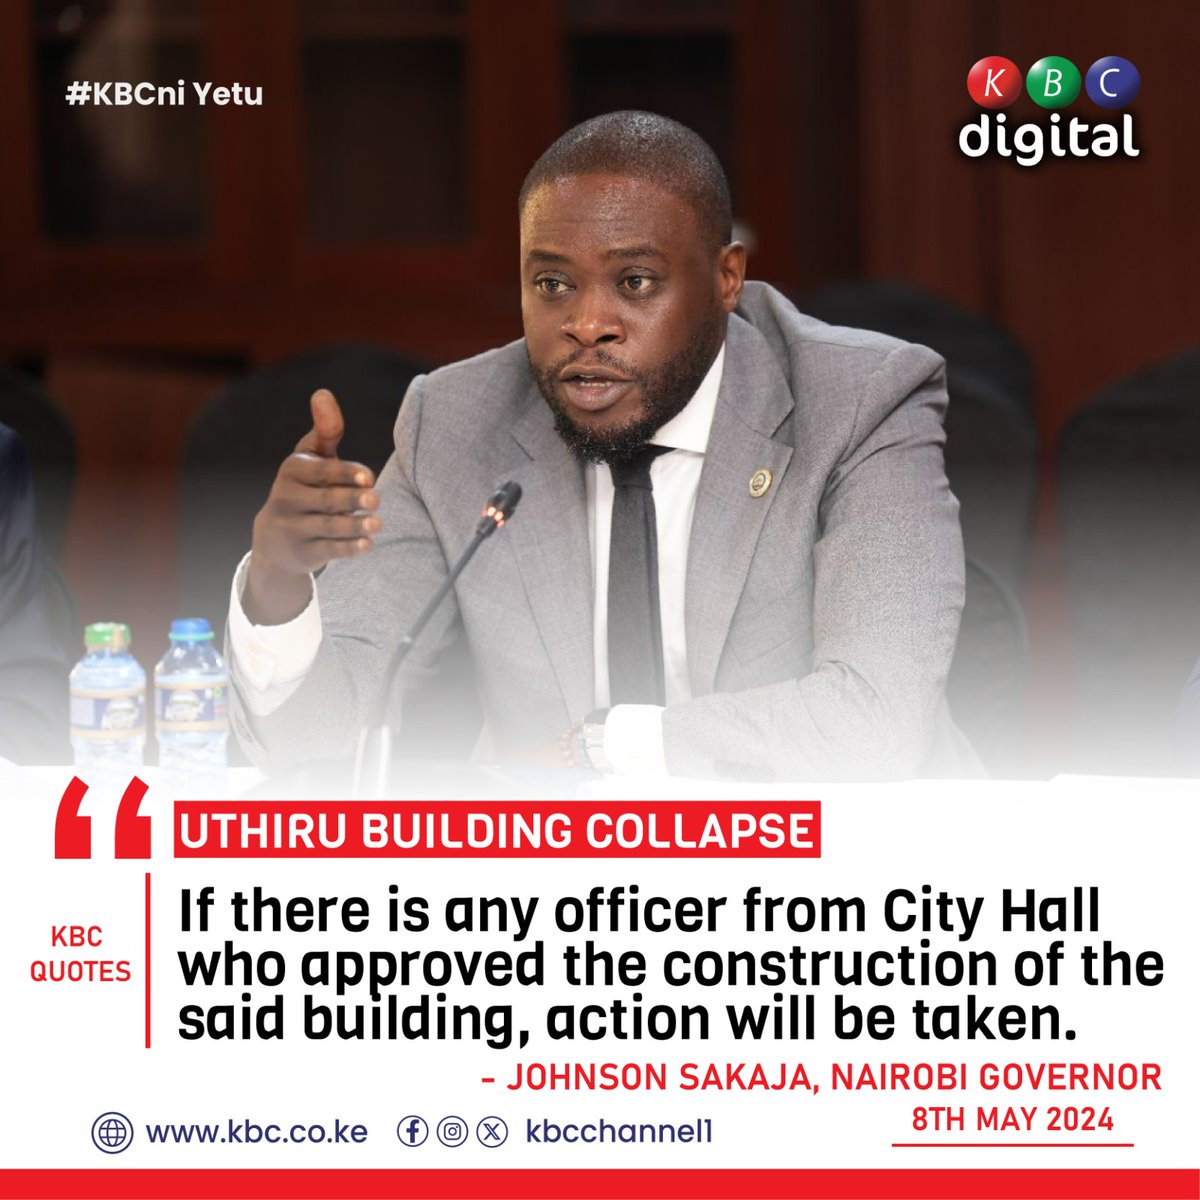 “If there is any officer from City Hall who approved the construction of the said building, action will be taken.” #KBCniYetu ^RO